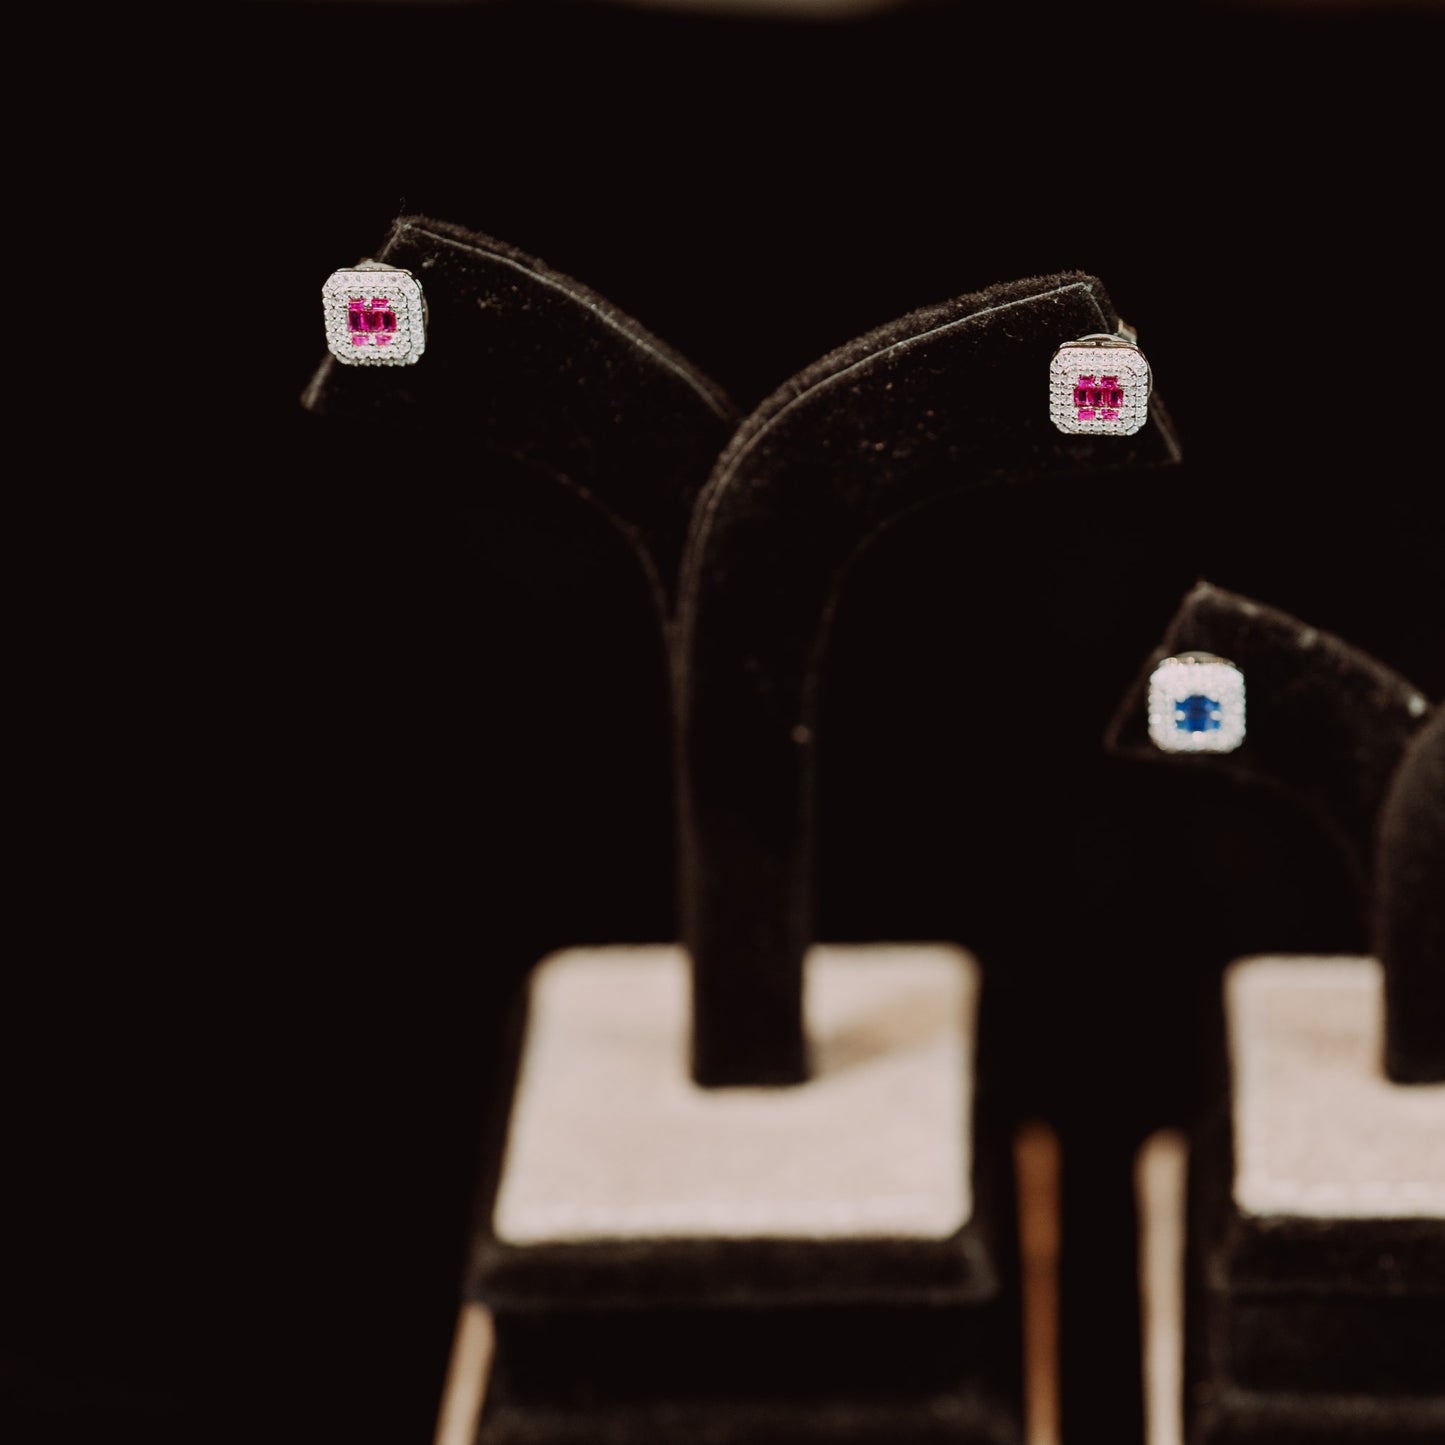 Square Silver Symmetry Studs with Colored Stones in Middle